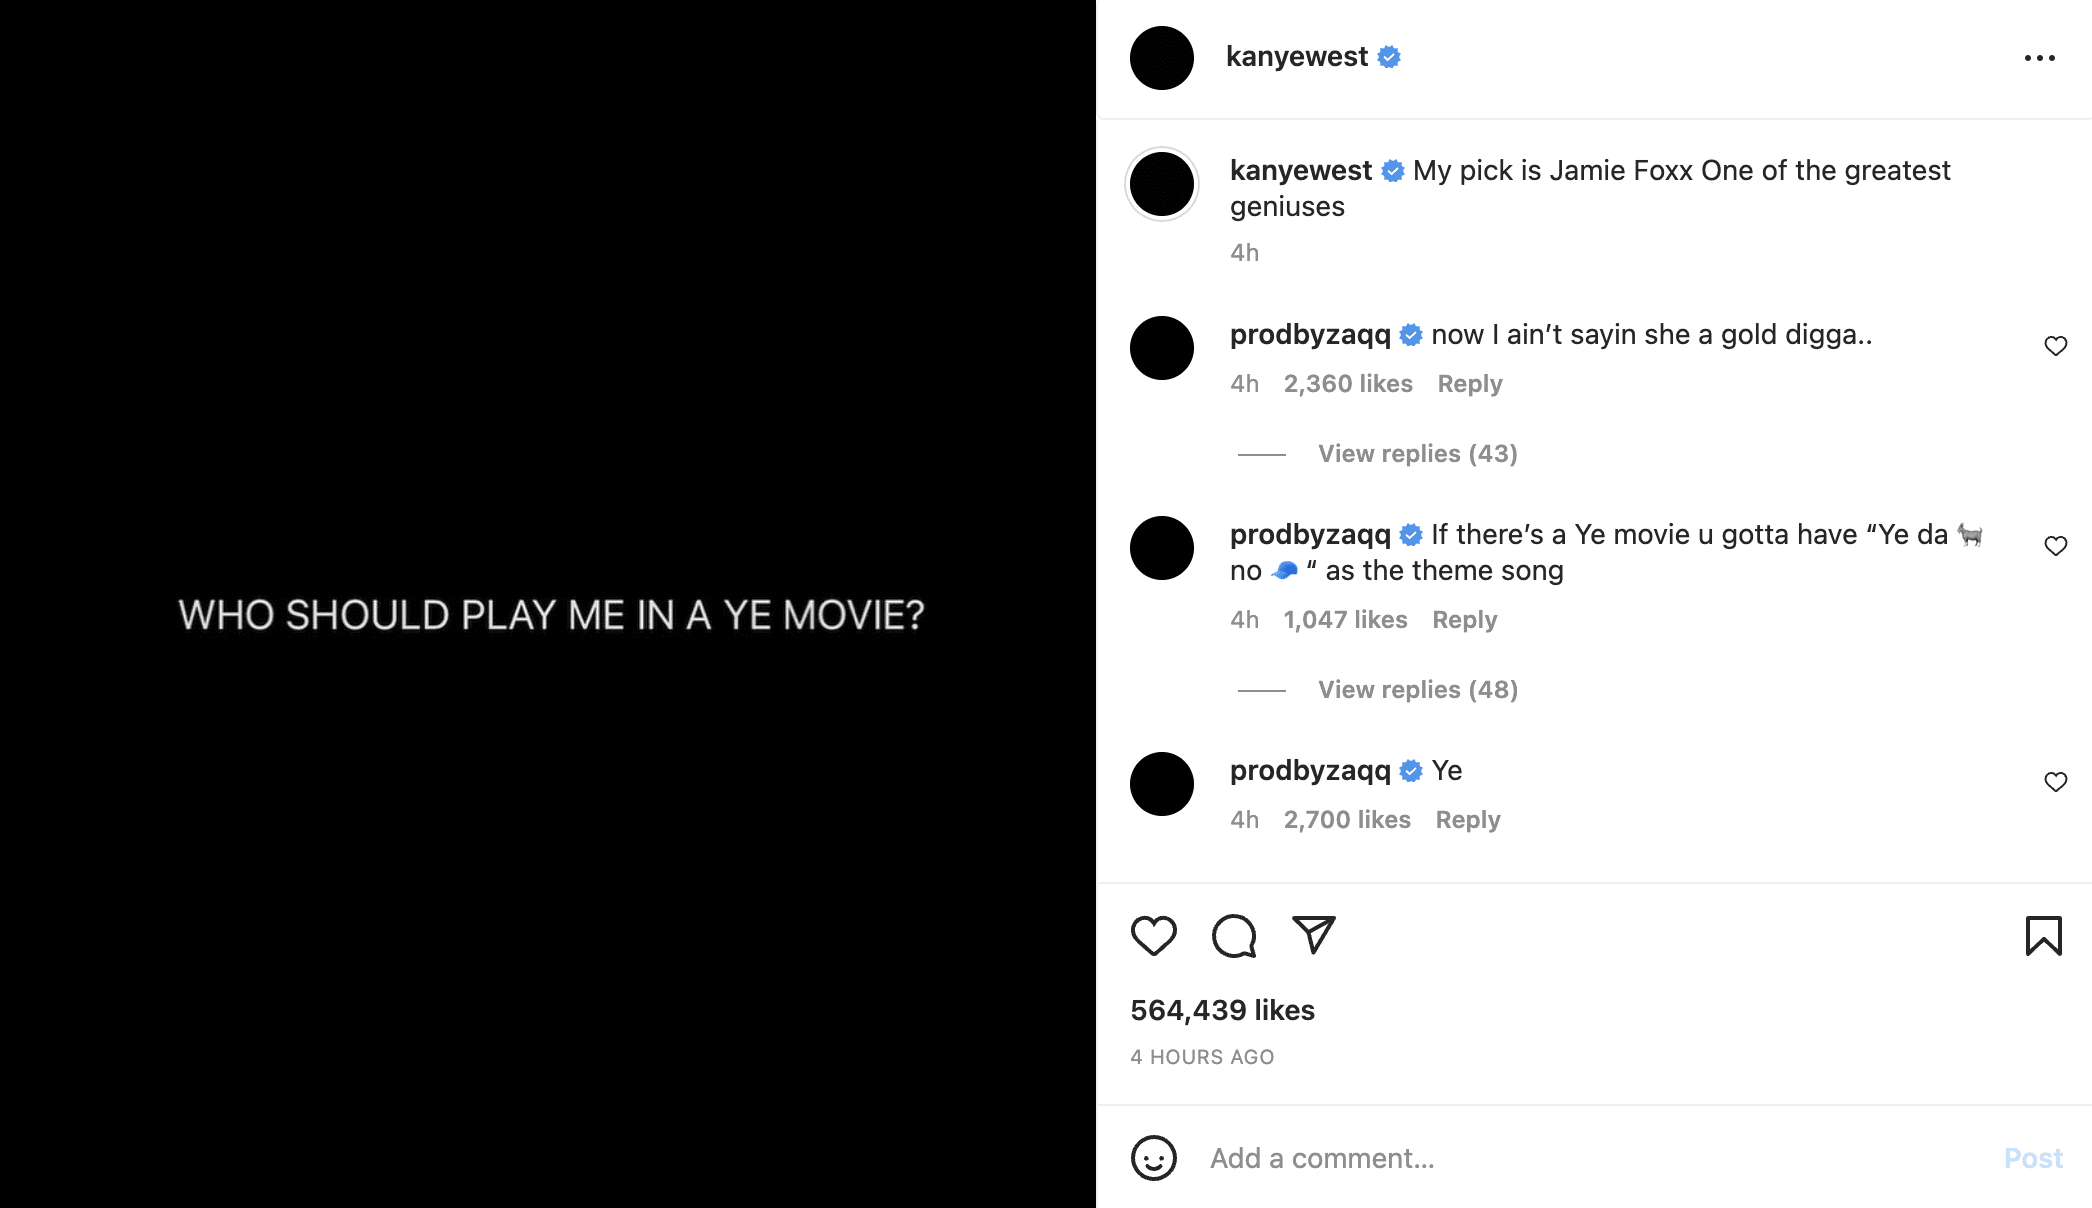 kanye west asks who should play him in a movie